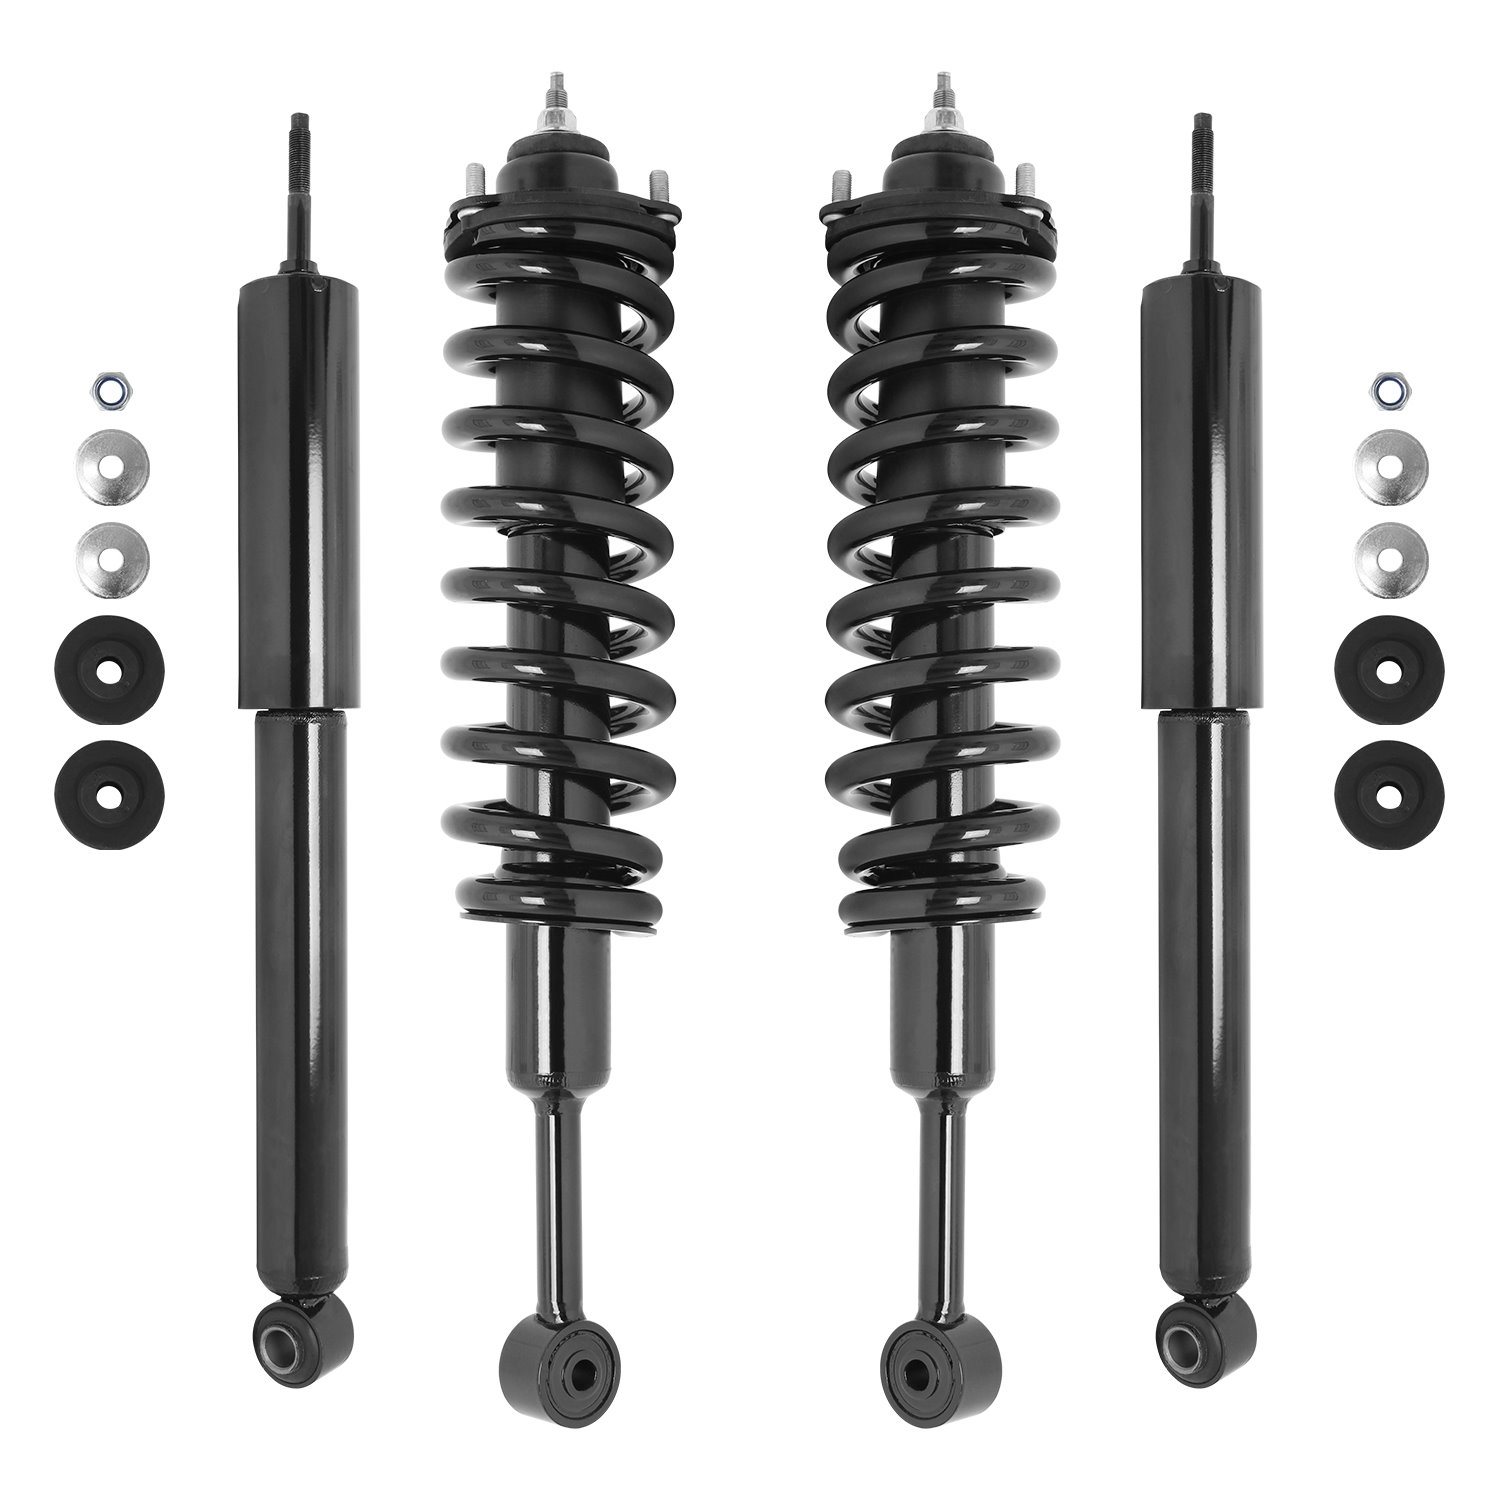 4-11563-254030-001 Front & Rear Suspension Strut & Coil Spring Assembly Fits Select Toyota 4Runner, Toyota FJ Cruiser